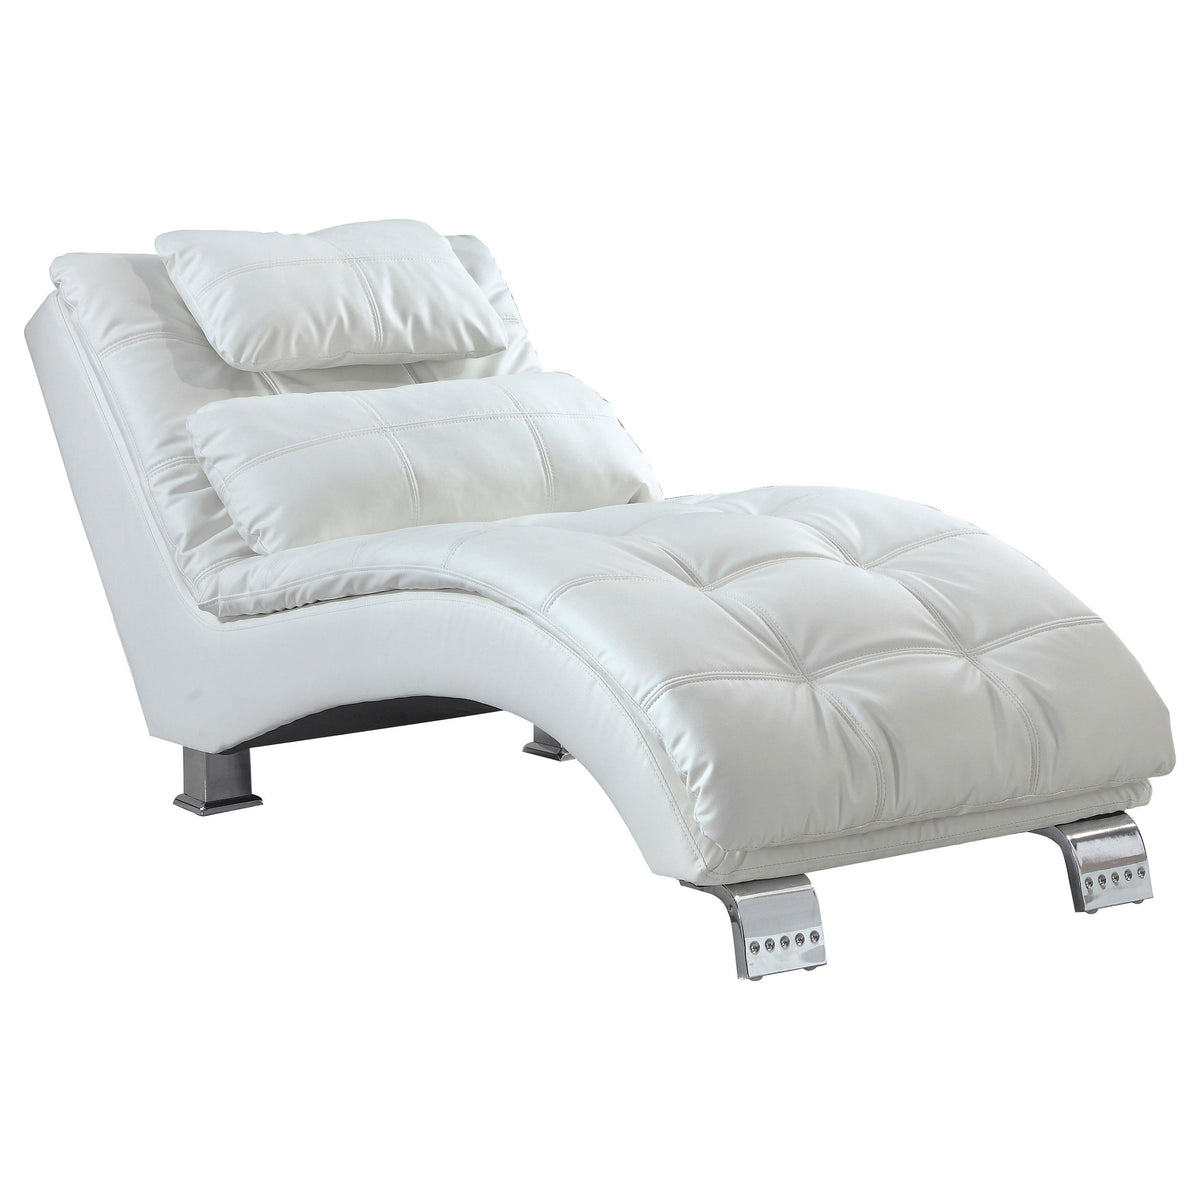 Dilleston Upholstered Chaise White  Half Price Furniture